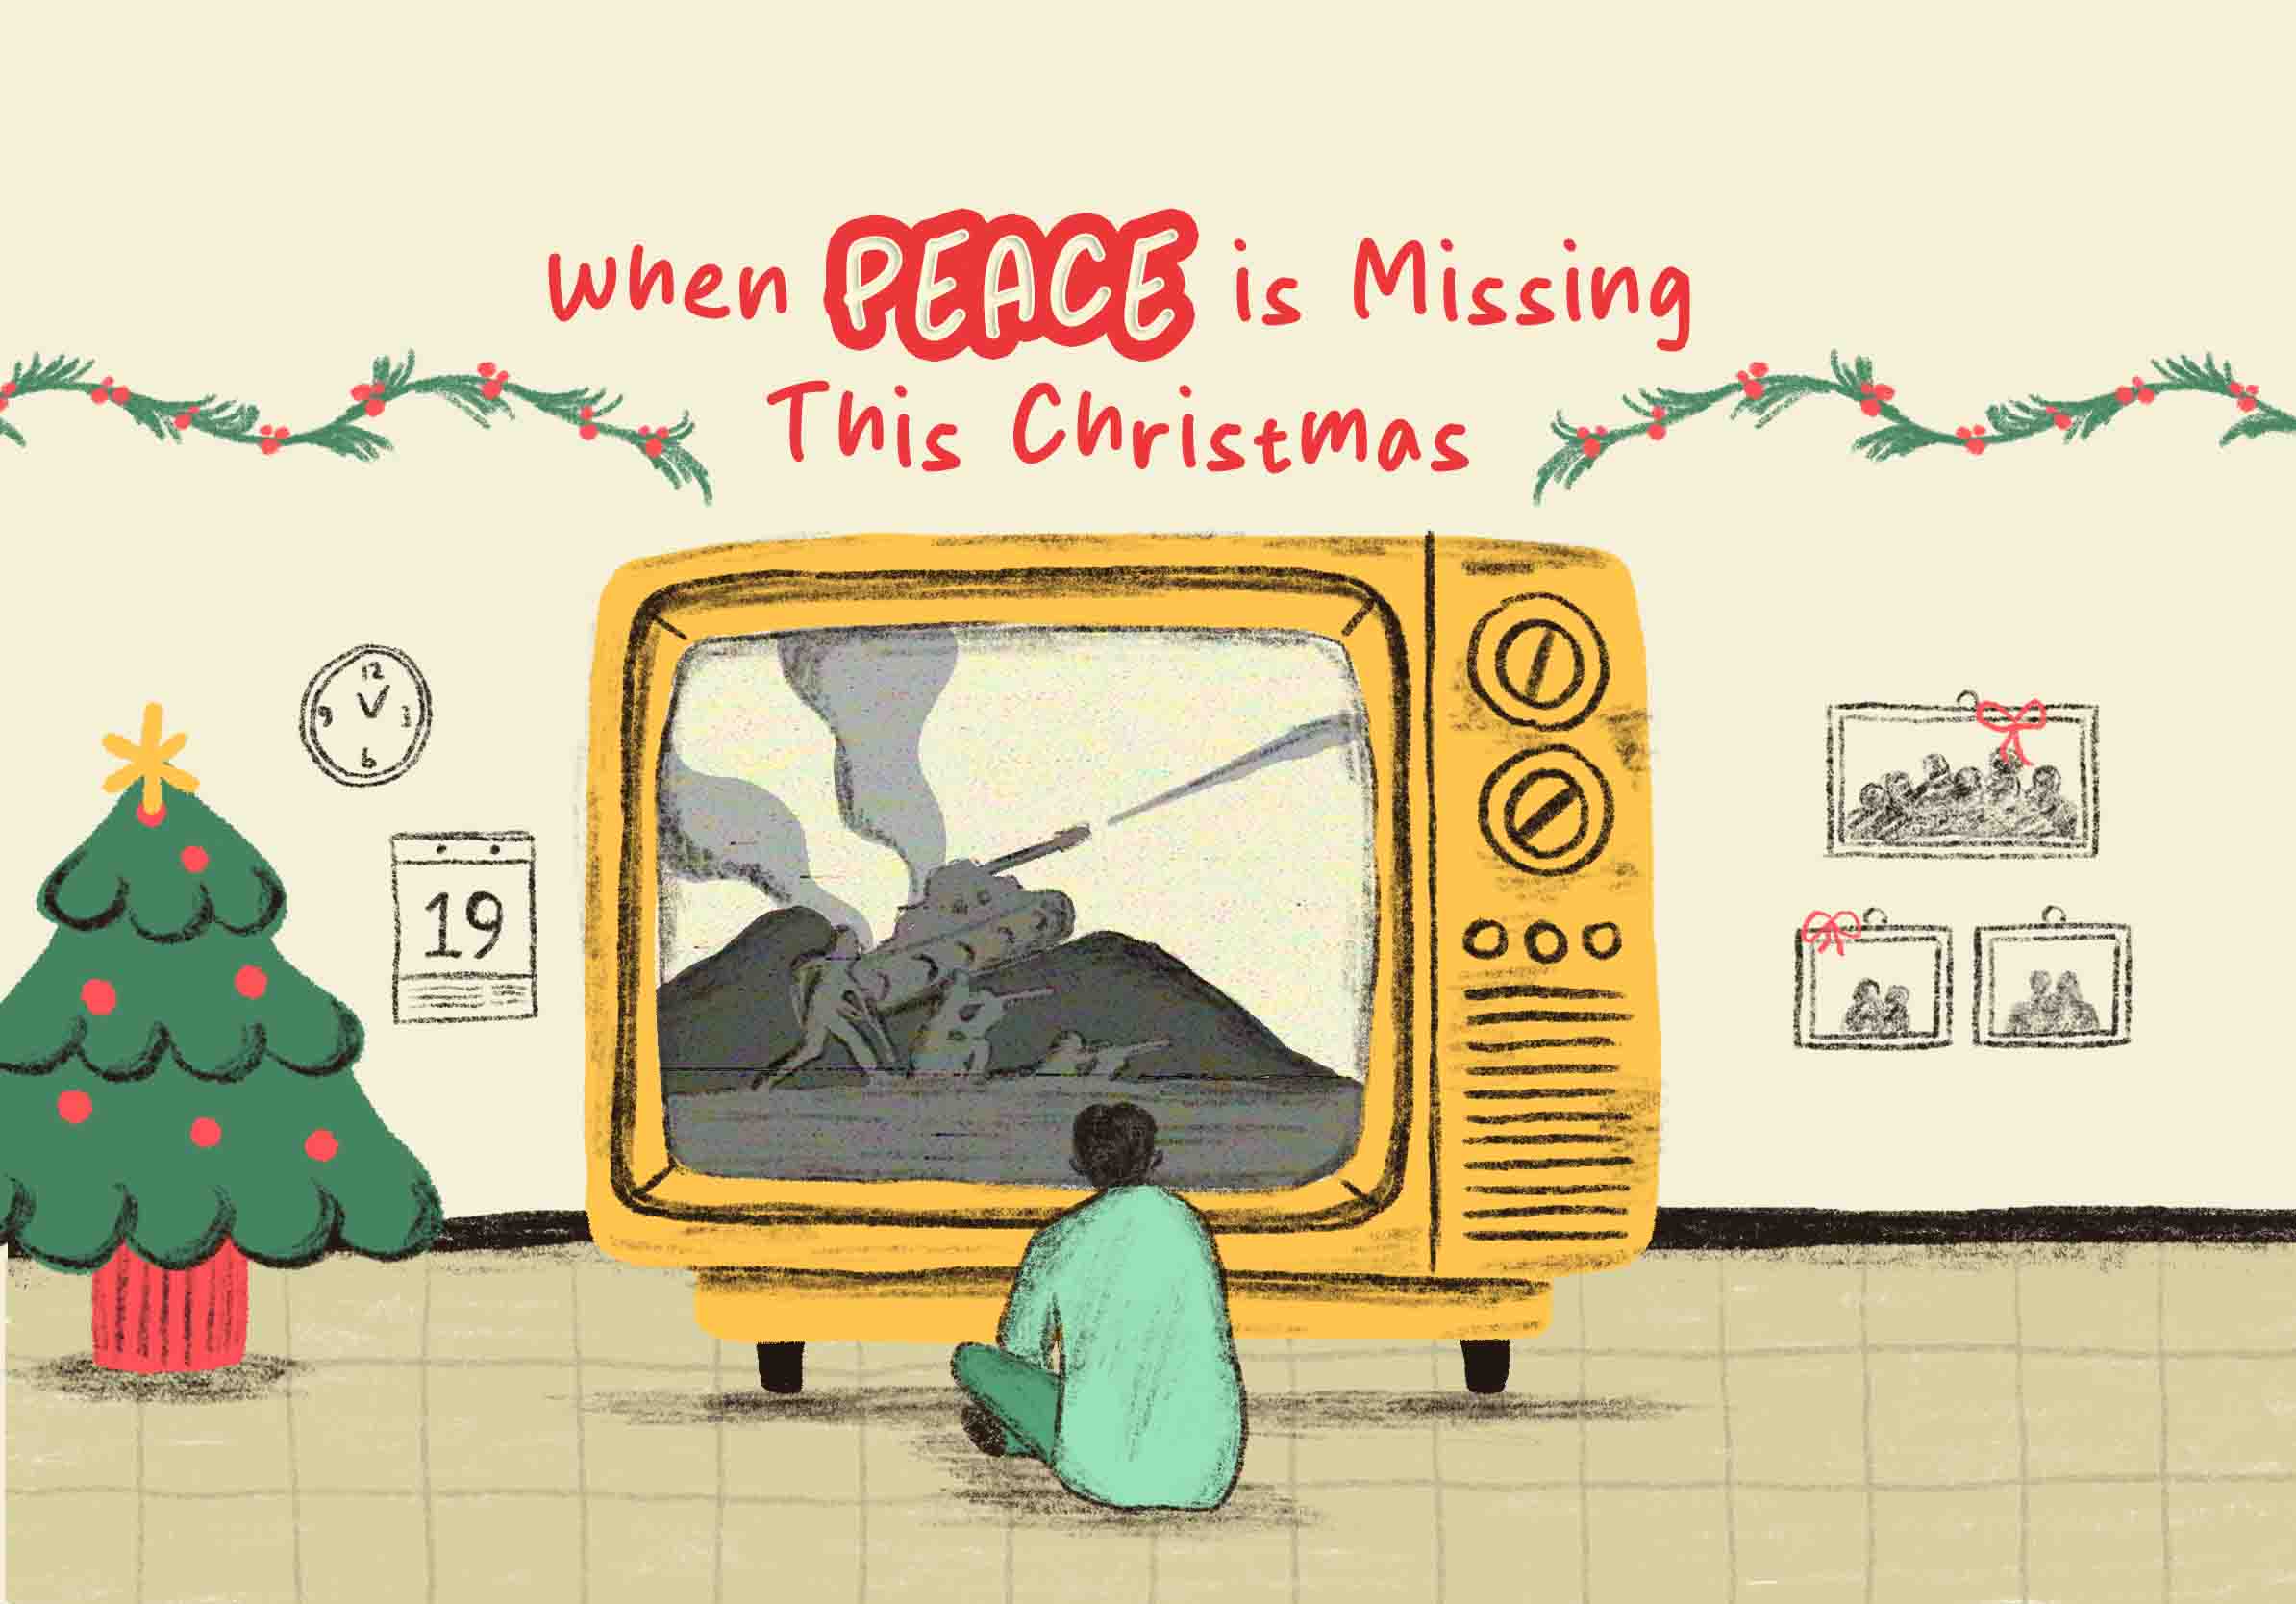 When Peace is Missing This Christmas